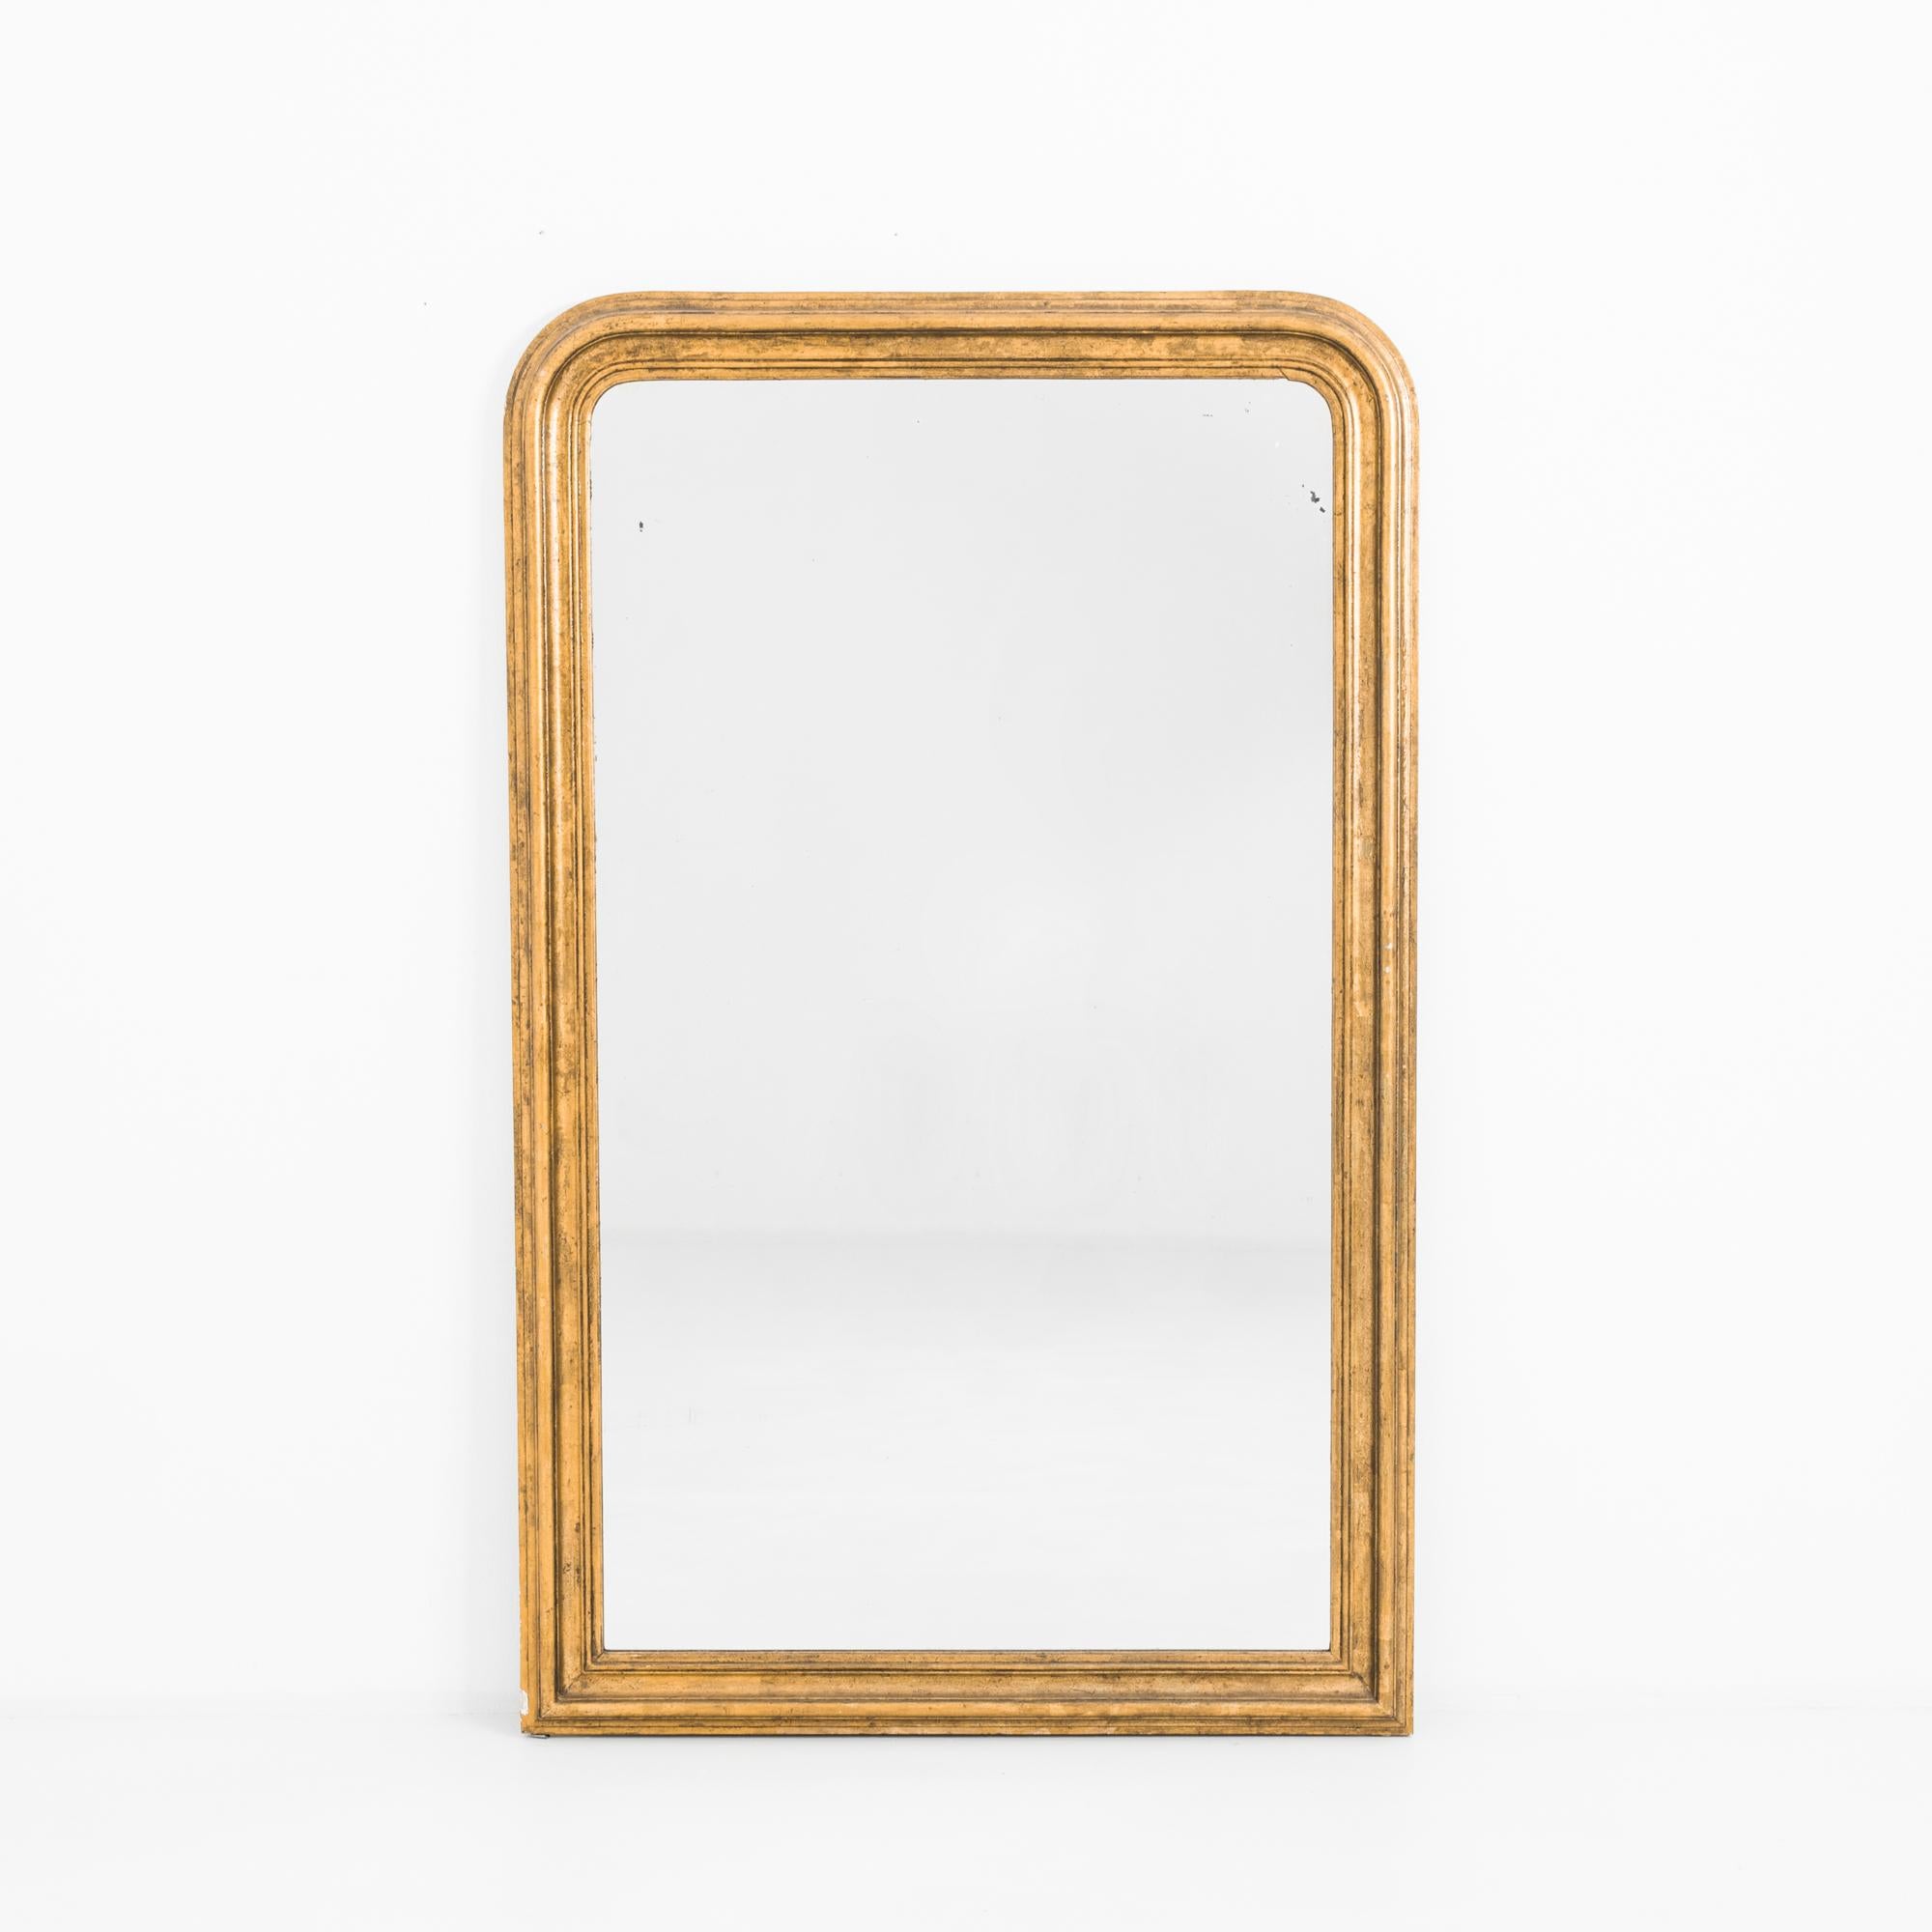 In a typical Louis Philippe style, this elegant arched frame, charms in spaces simple or ornate. From France, circa 1880. Finely crafted with traditional techniques from European oak, plastered, painted, and carefully gold-leafed. A neoclassical